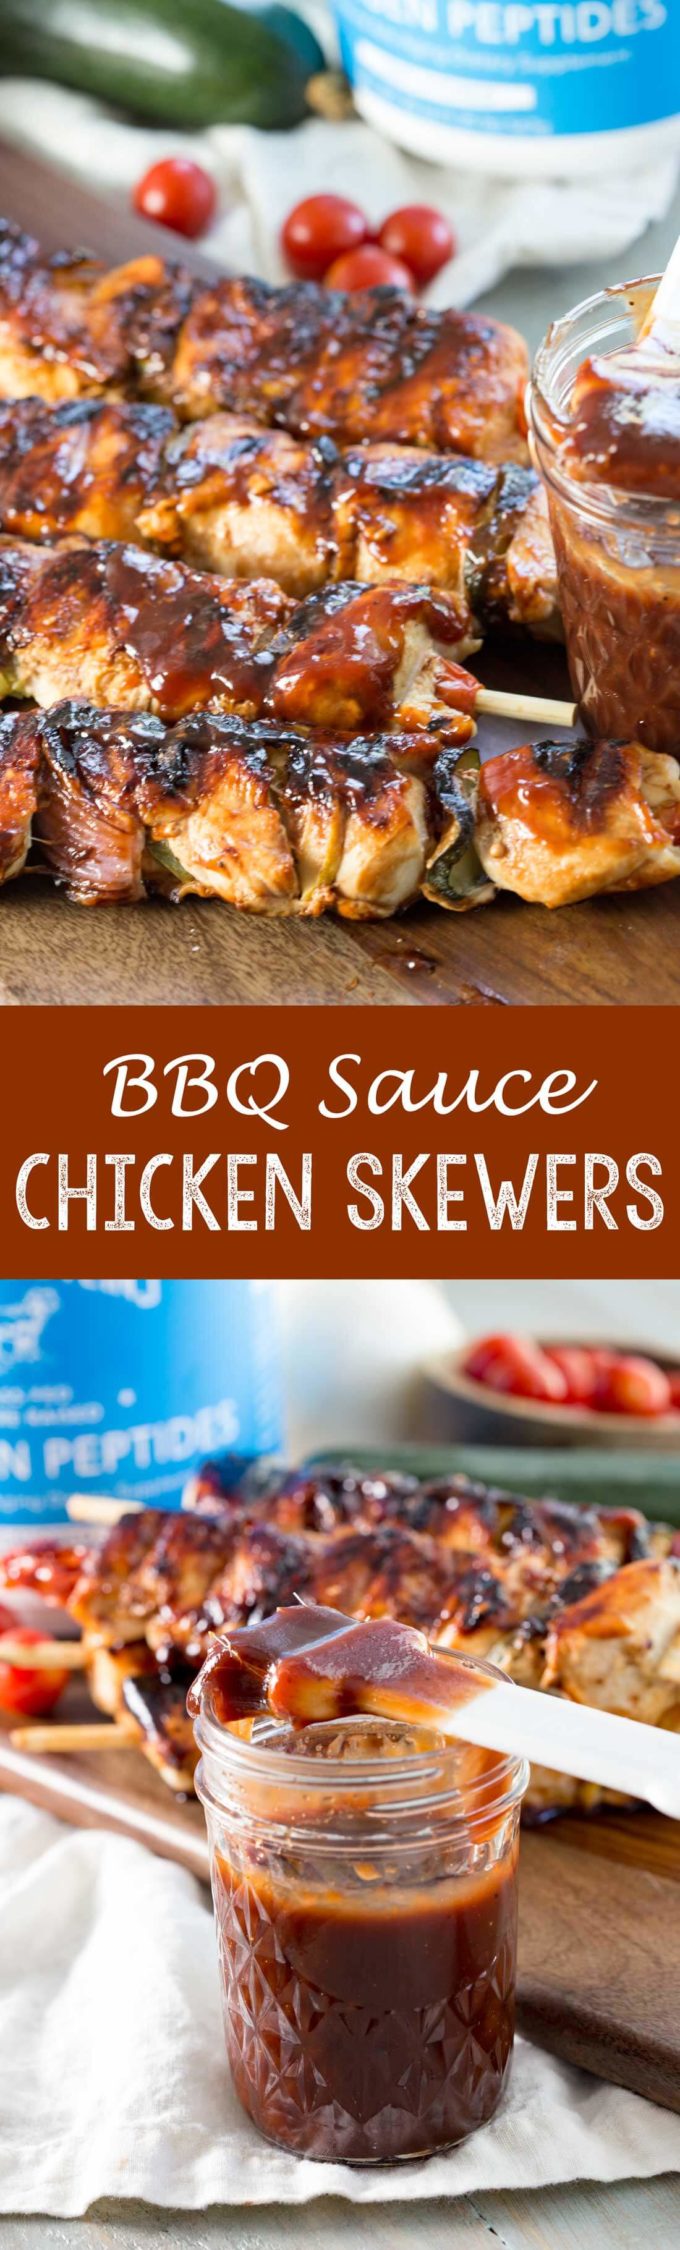 A protein packed BBQ sauce on grilled chicken skewers